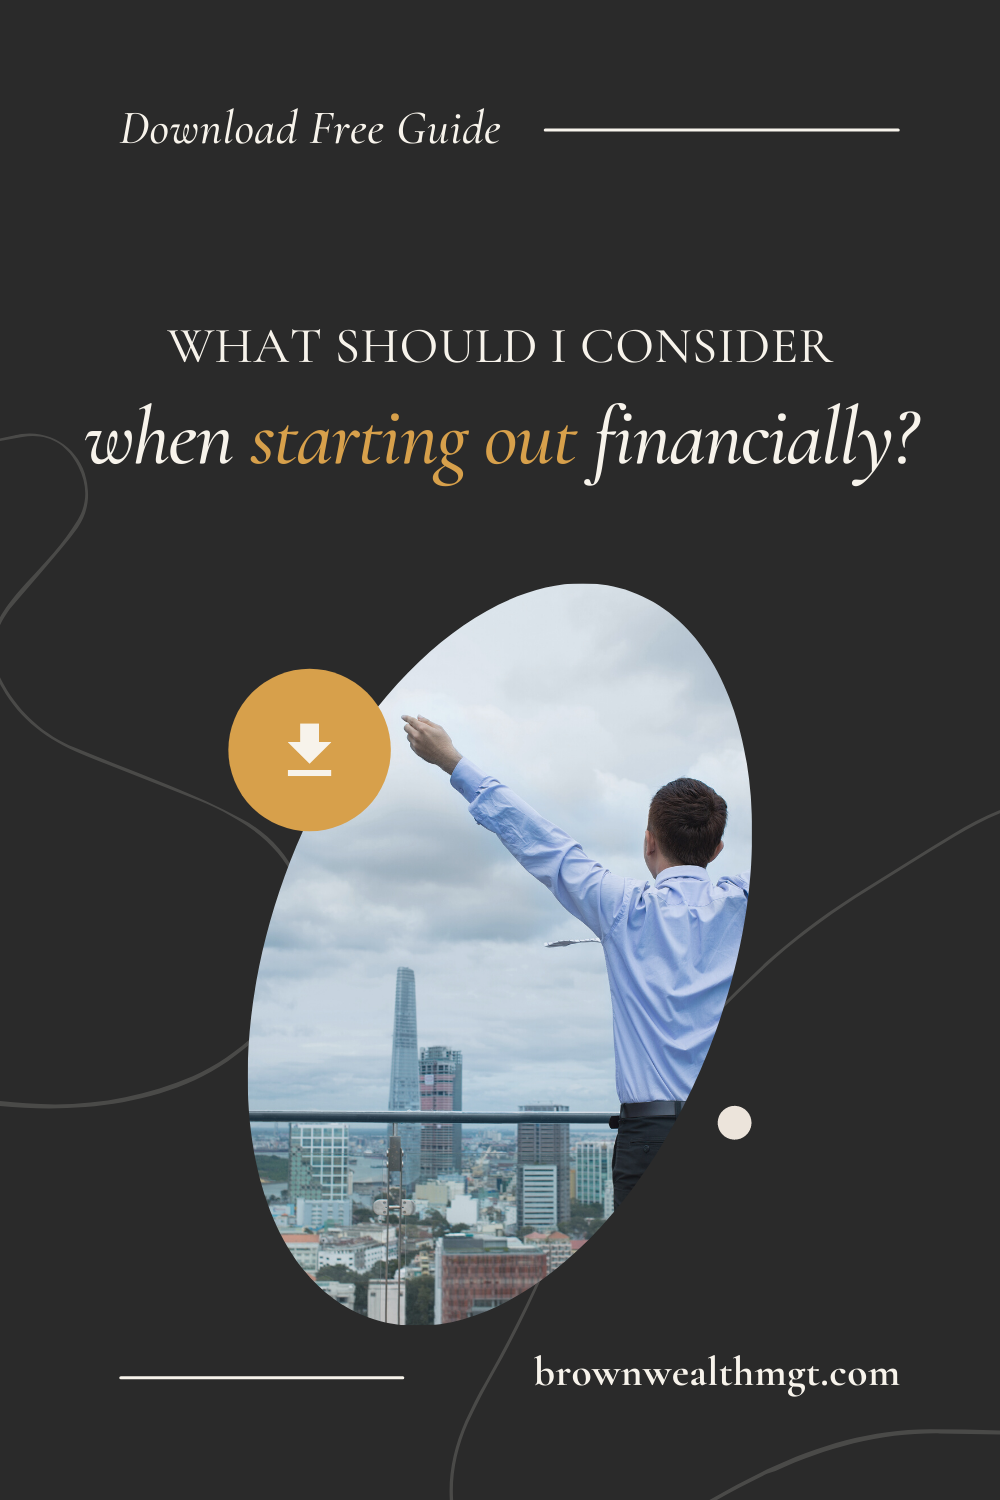 What should I consider when starting out financially?